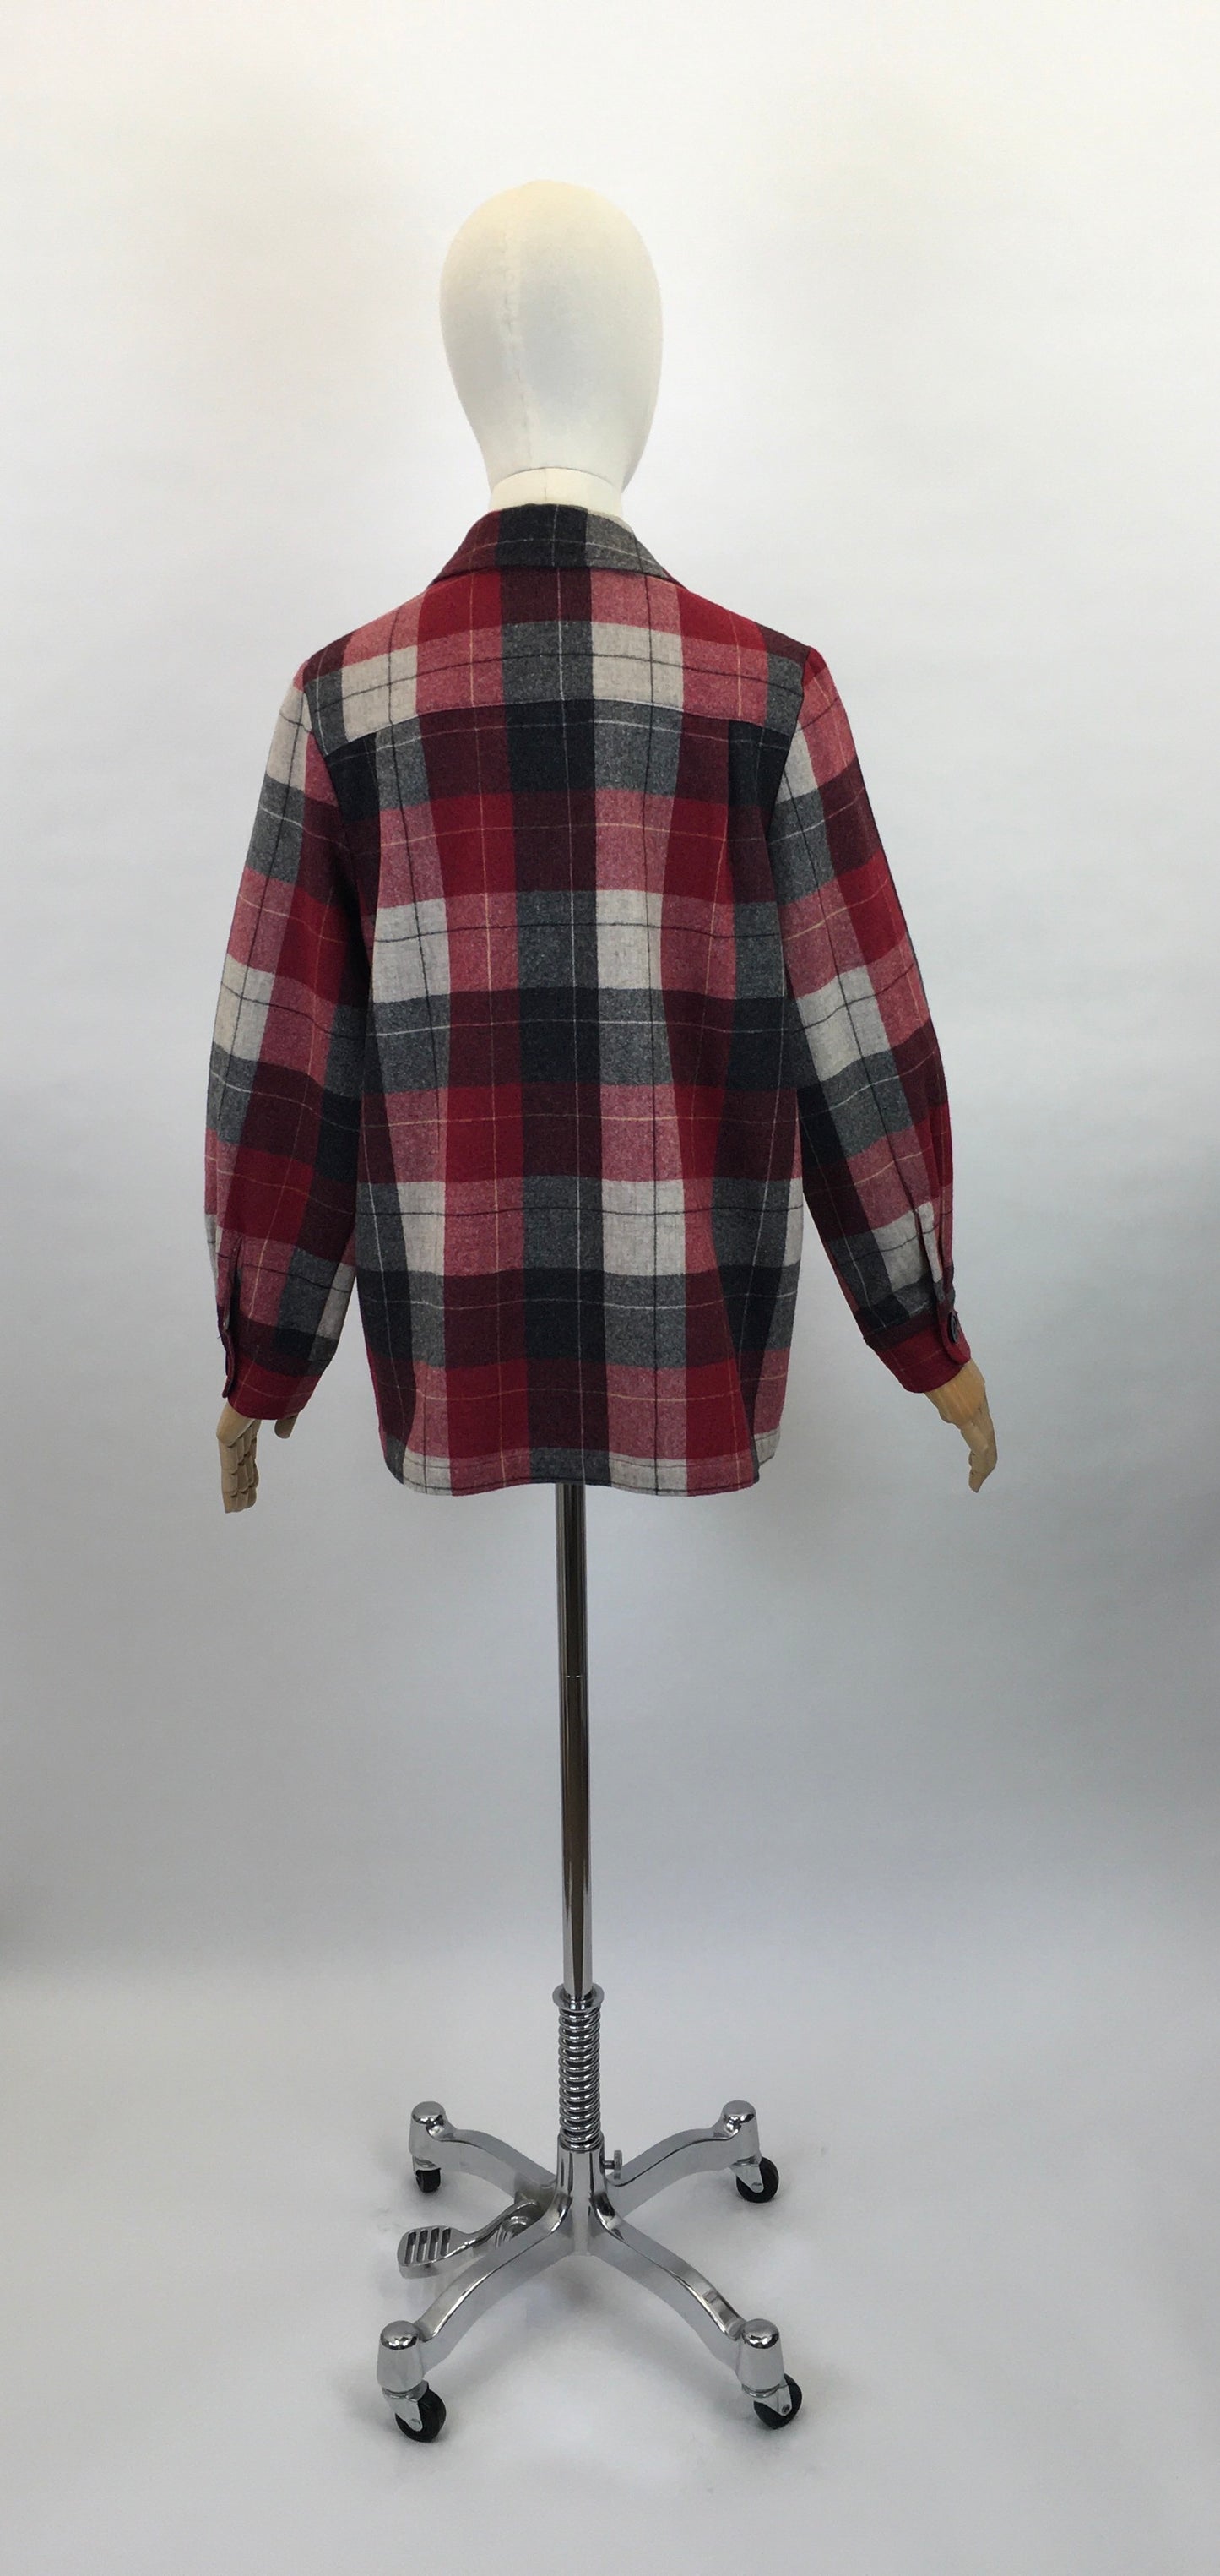 Original 1960’s Pendleton Check Jacket - In Lovely Warm Reds, Black’s and Ivories